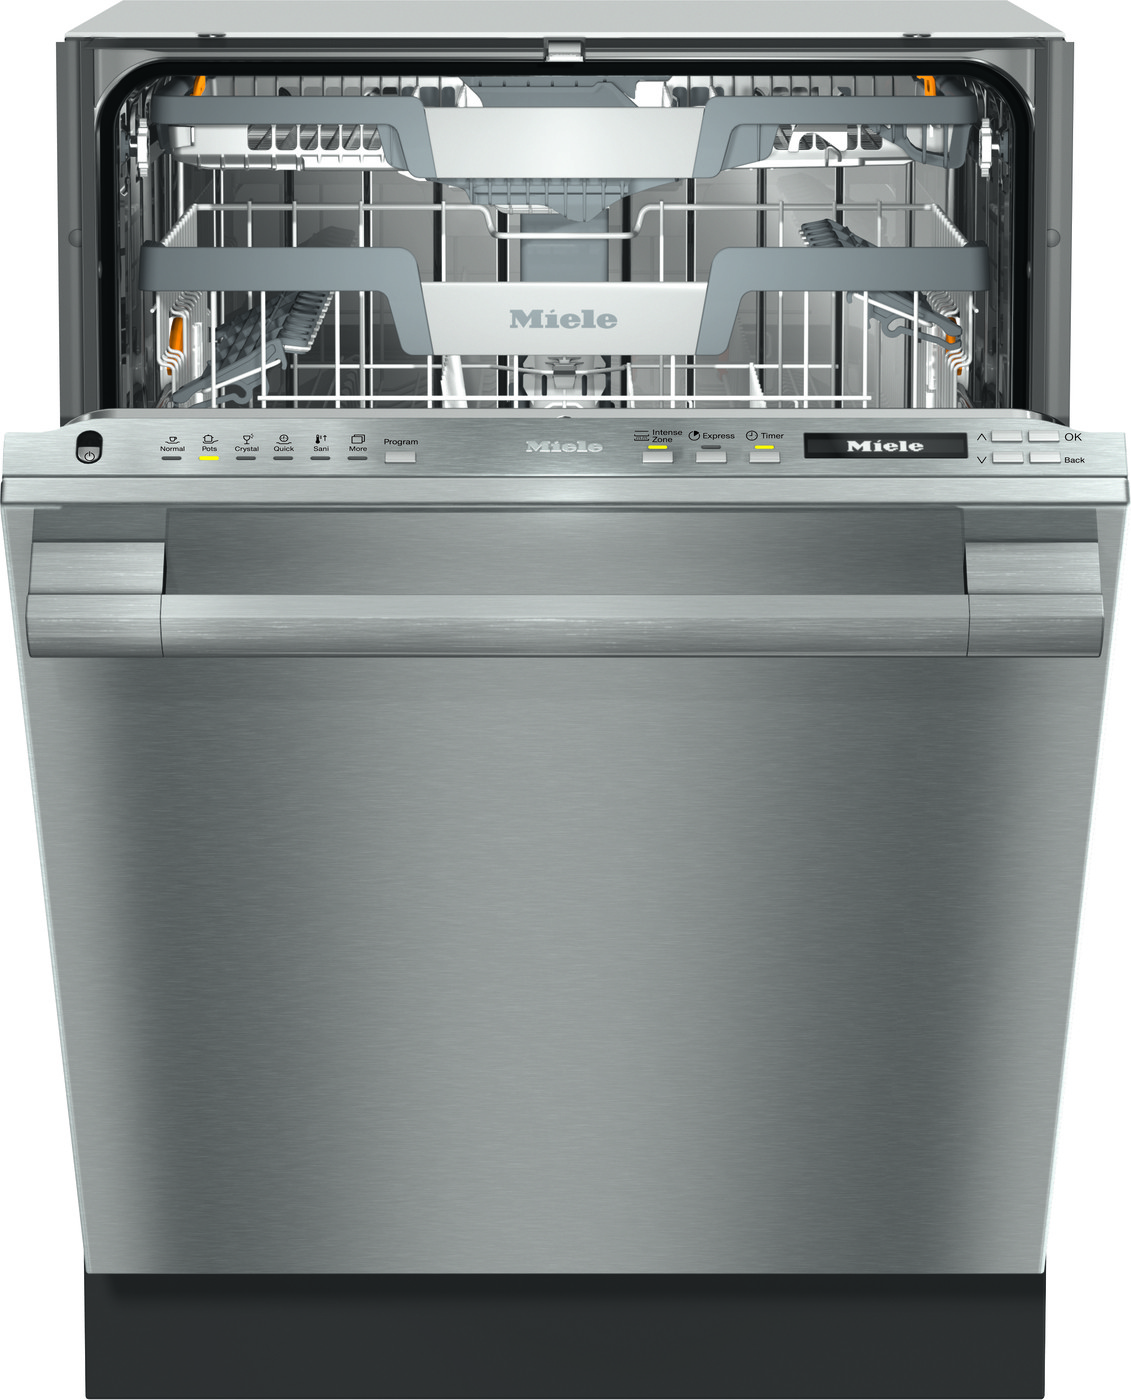 Miele Futura Crystal 24 Fully Integrated Built In Dishwasher G7156SCVISF